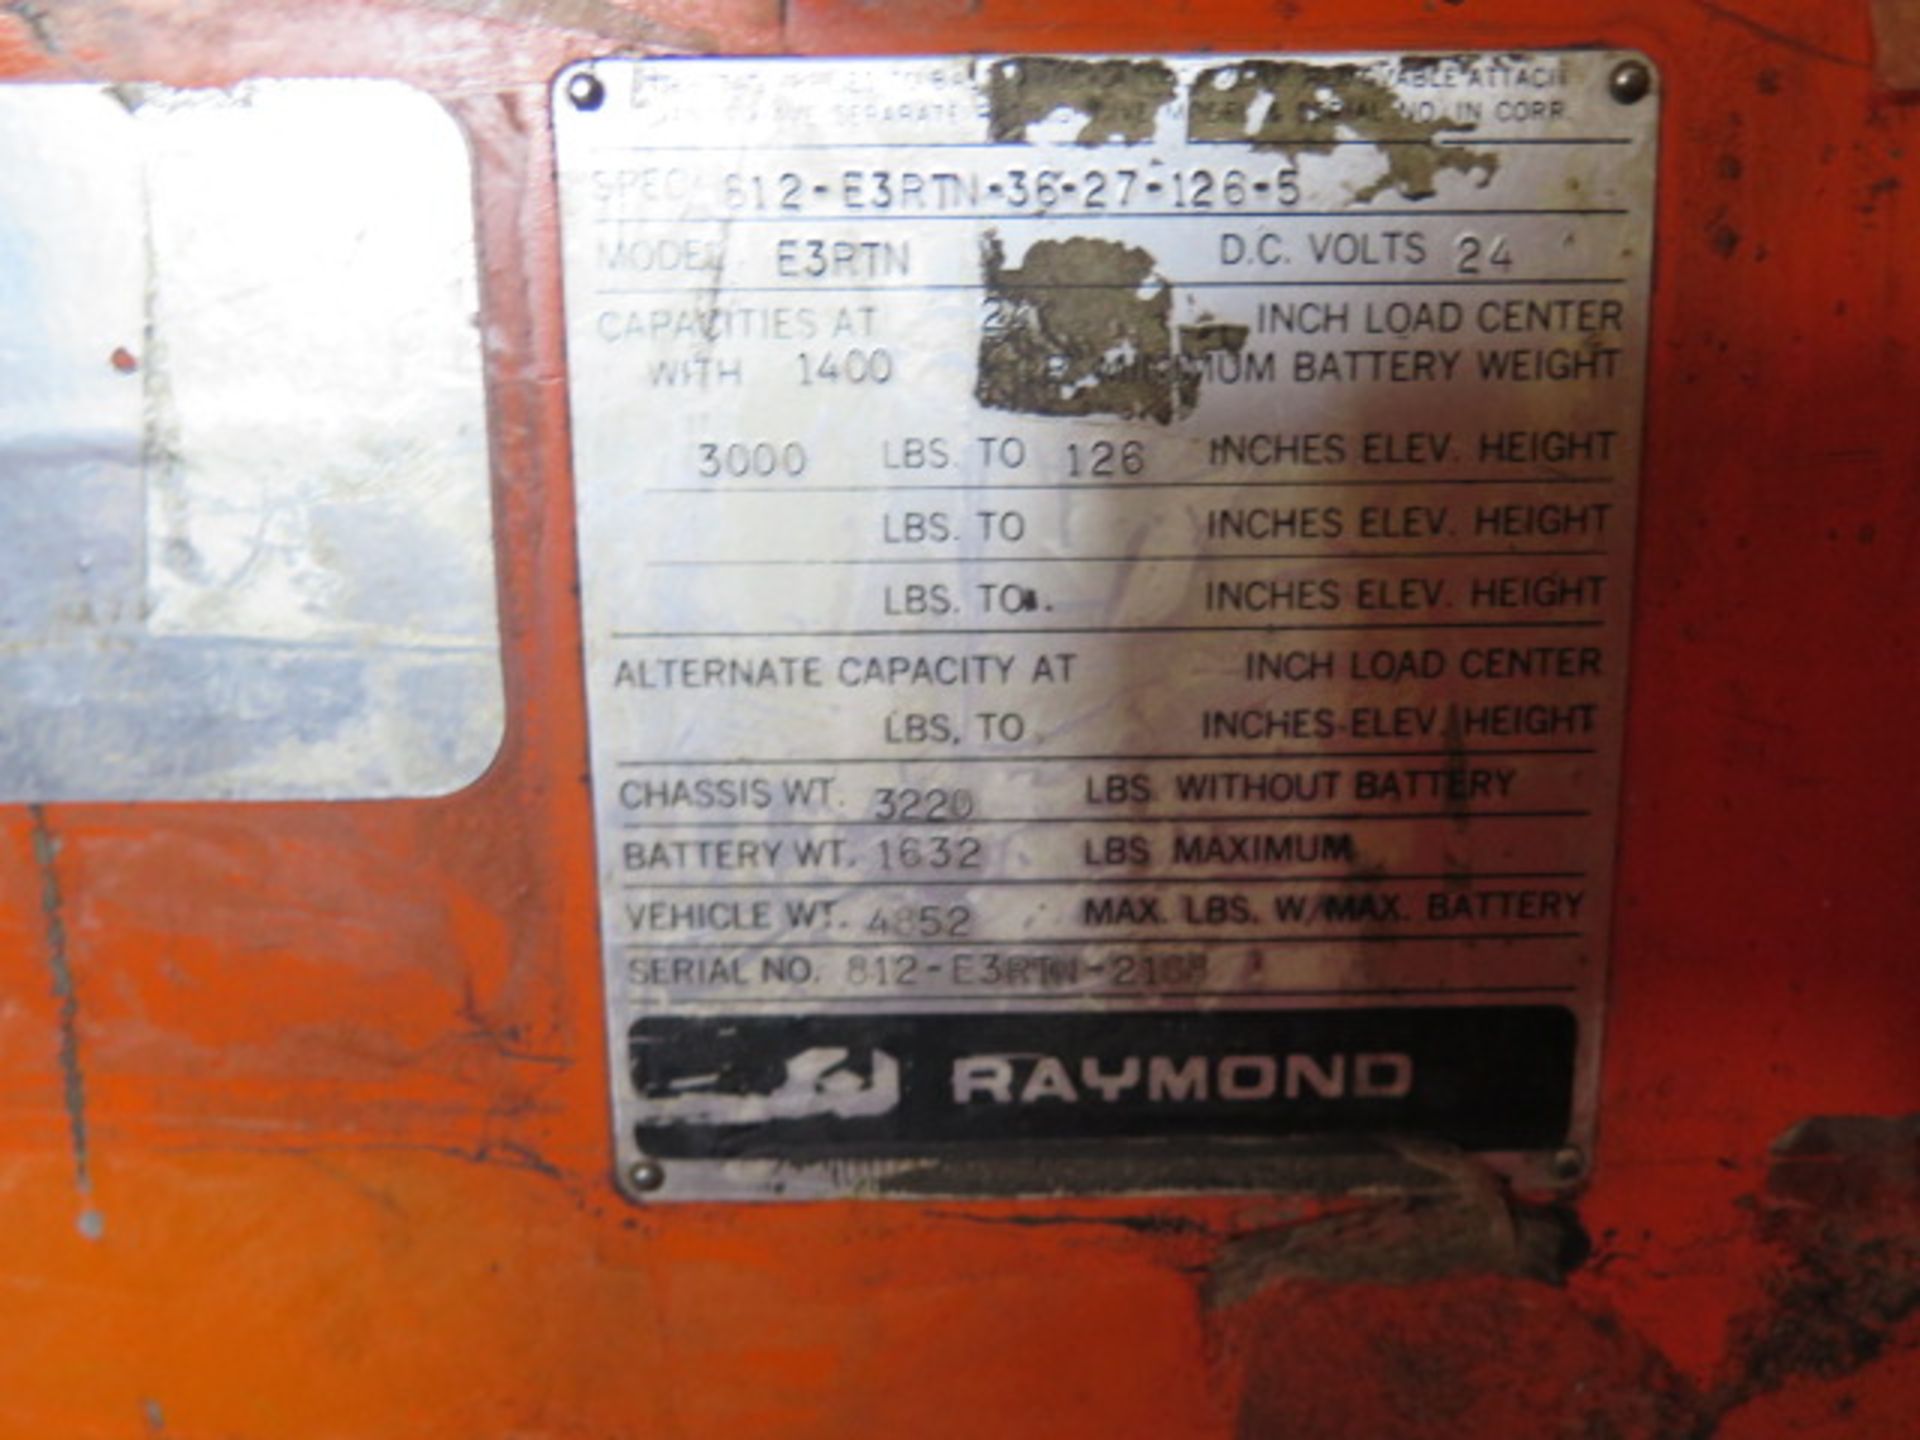 Raymond 812-E3RTN-36-27-126-5 3000 Lb Cap Stand-In Electric Paller Mover s/n 812-/, SOLD AS IS - Image 7 of 7